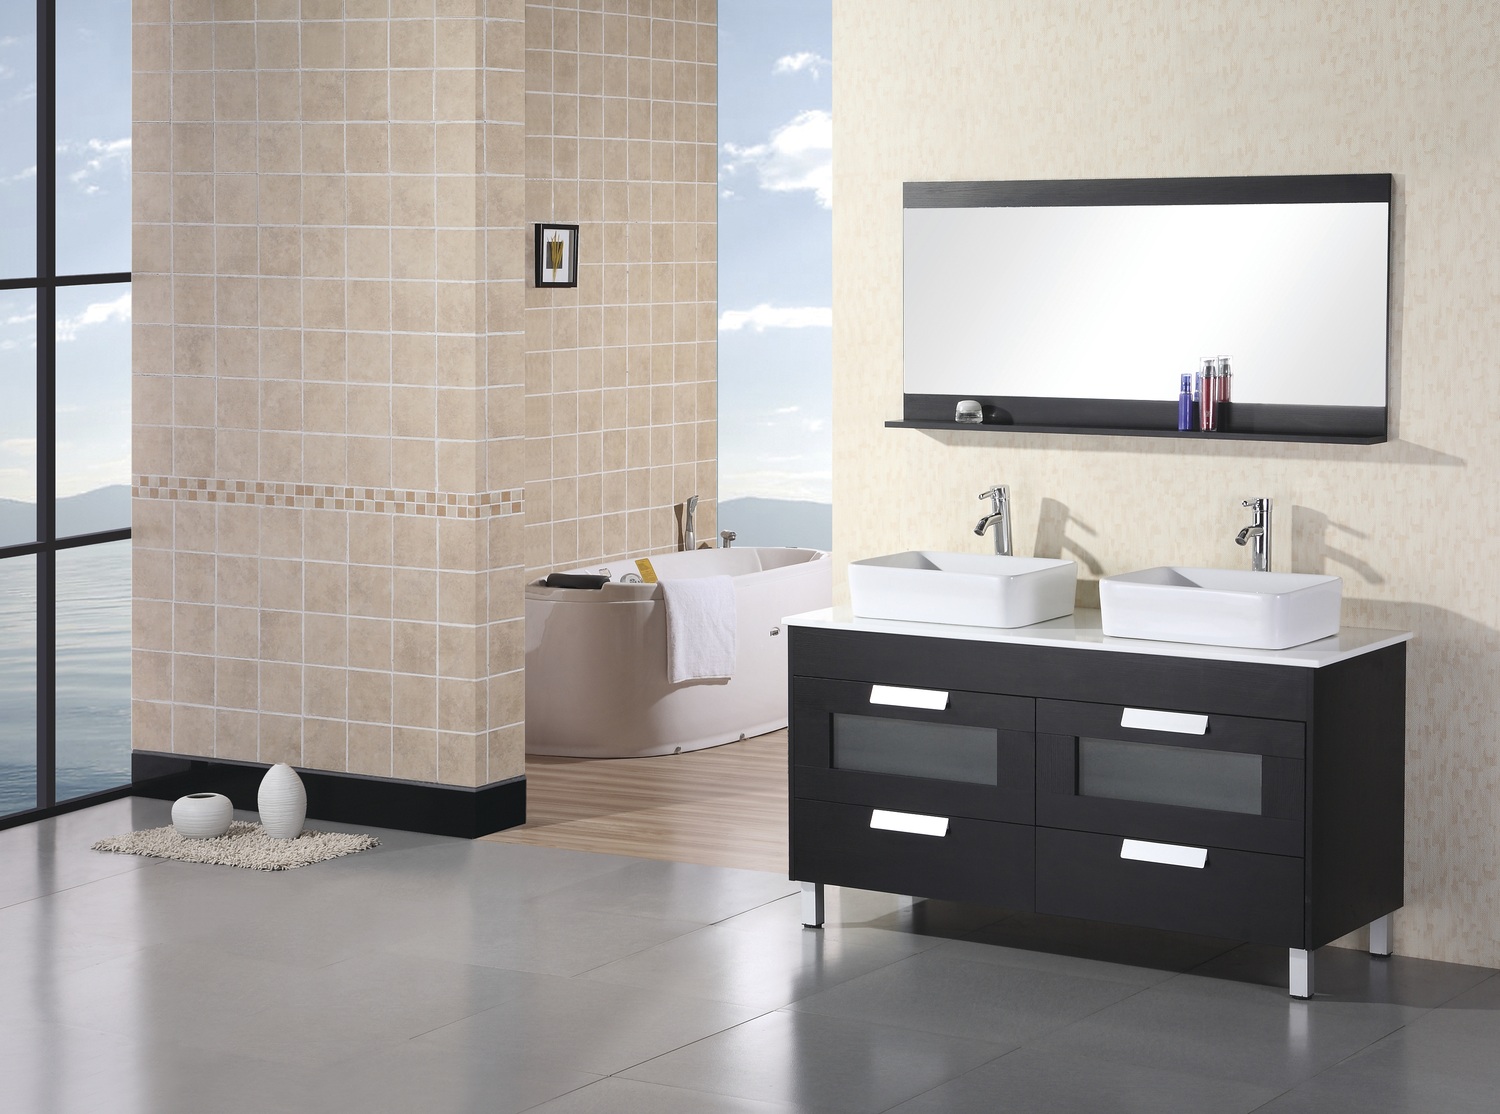 Gray Ceramic Paired Clean Gray Ceramic Floor Tile Paired With Black Freestanding Bathroom Vanity Set Plus Double Square White Sinks Designed Under Rectangular Wall Mirror Bathroom  Double Function From Double Sink Vanity 